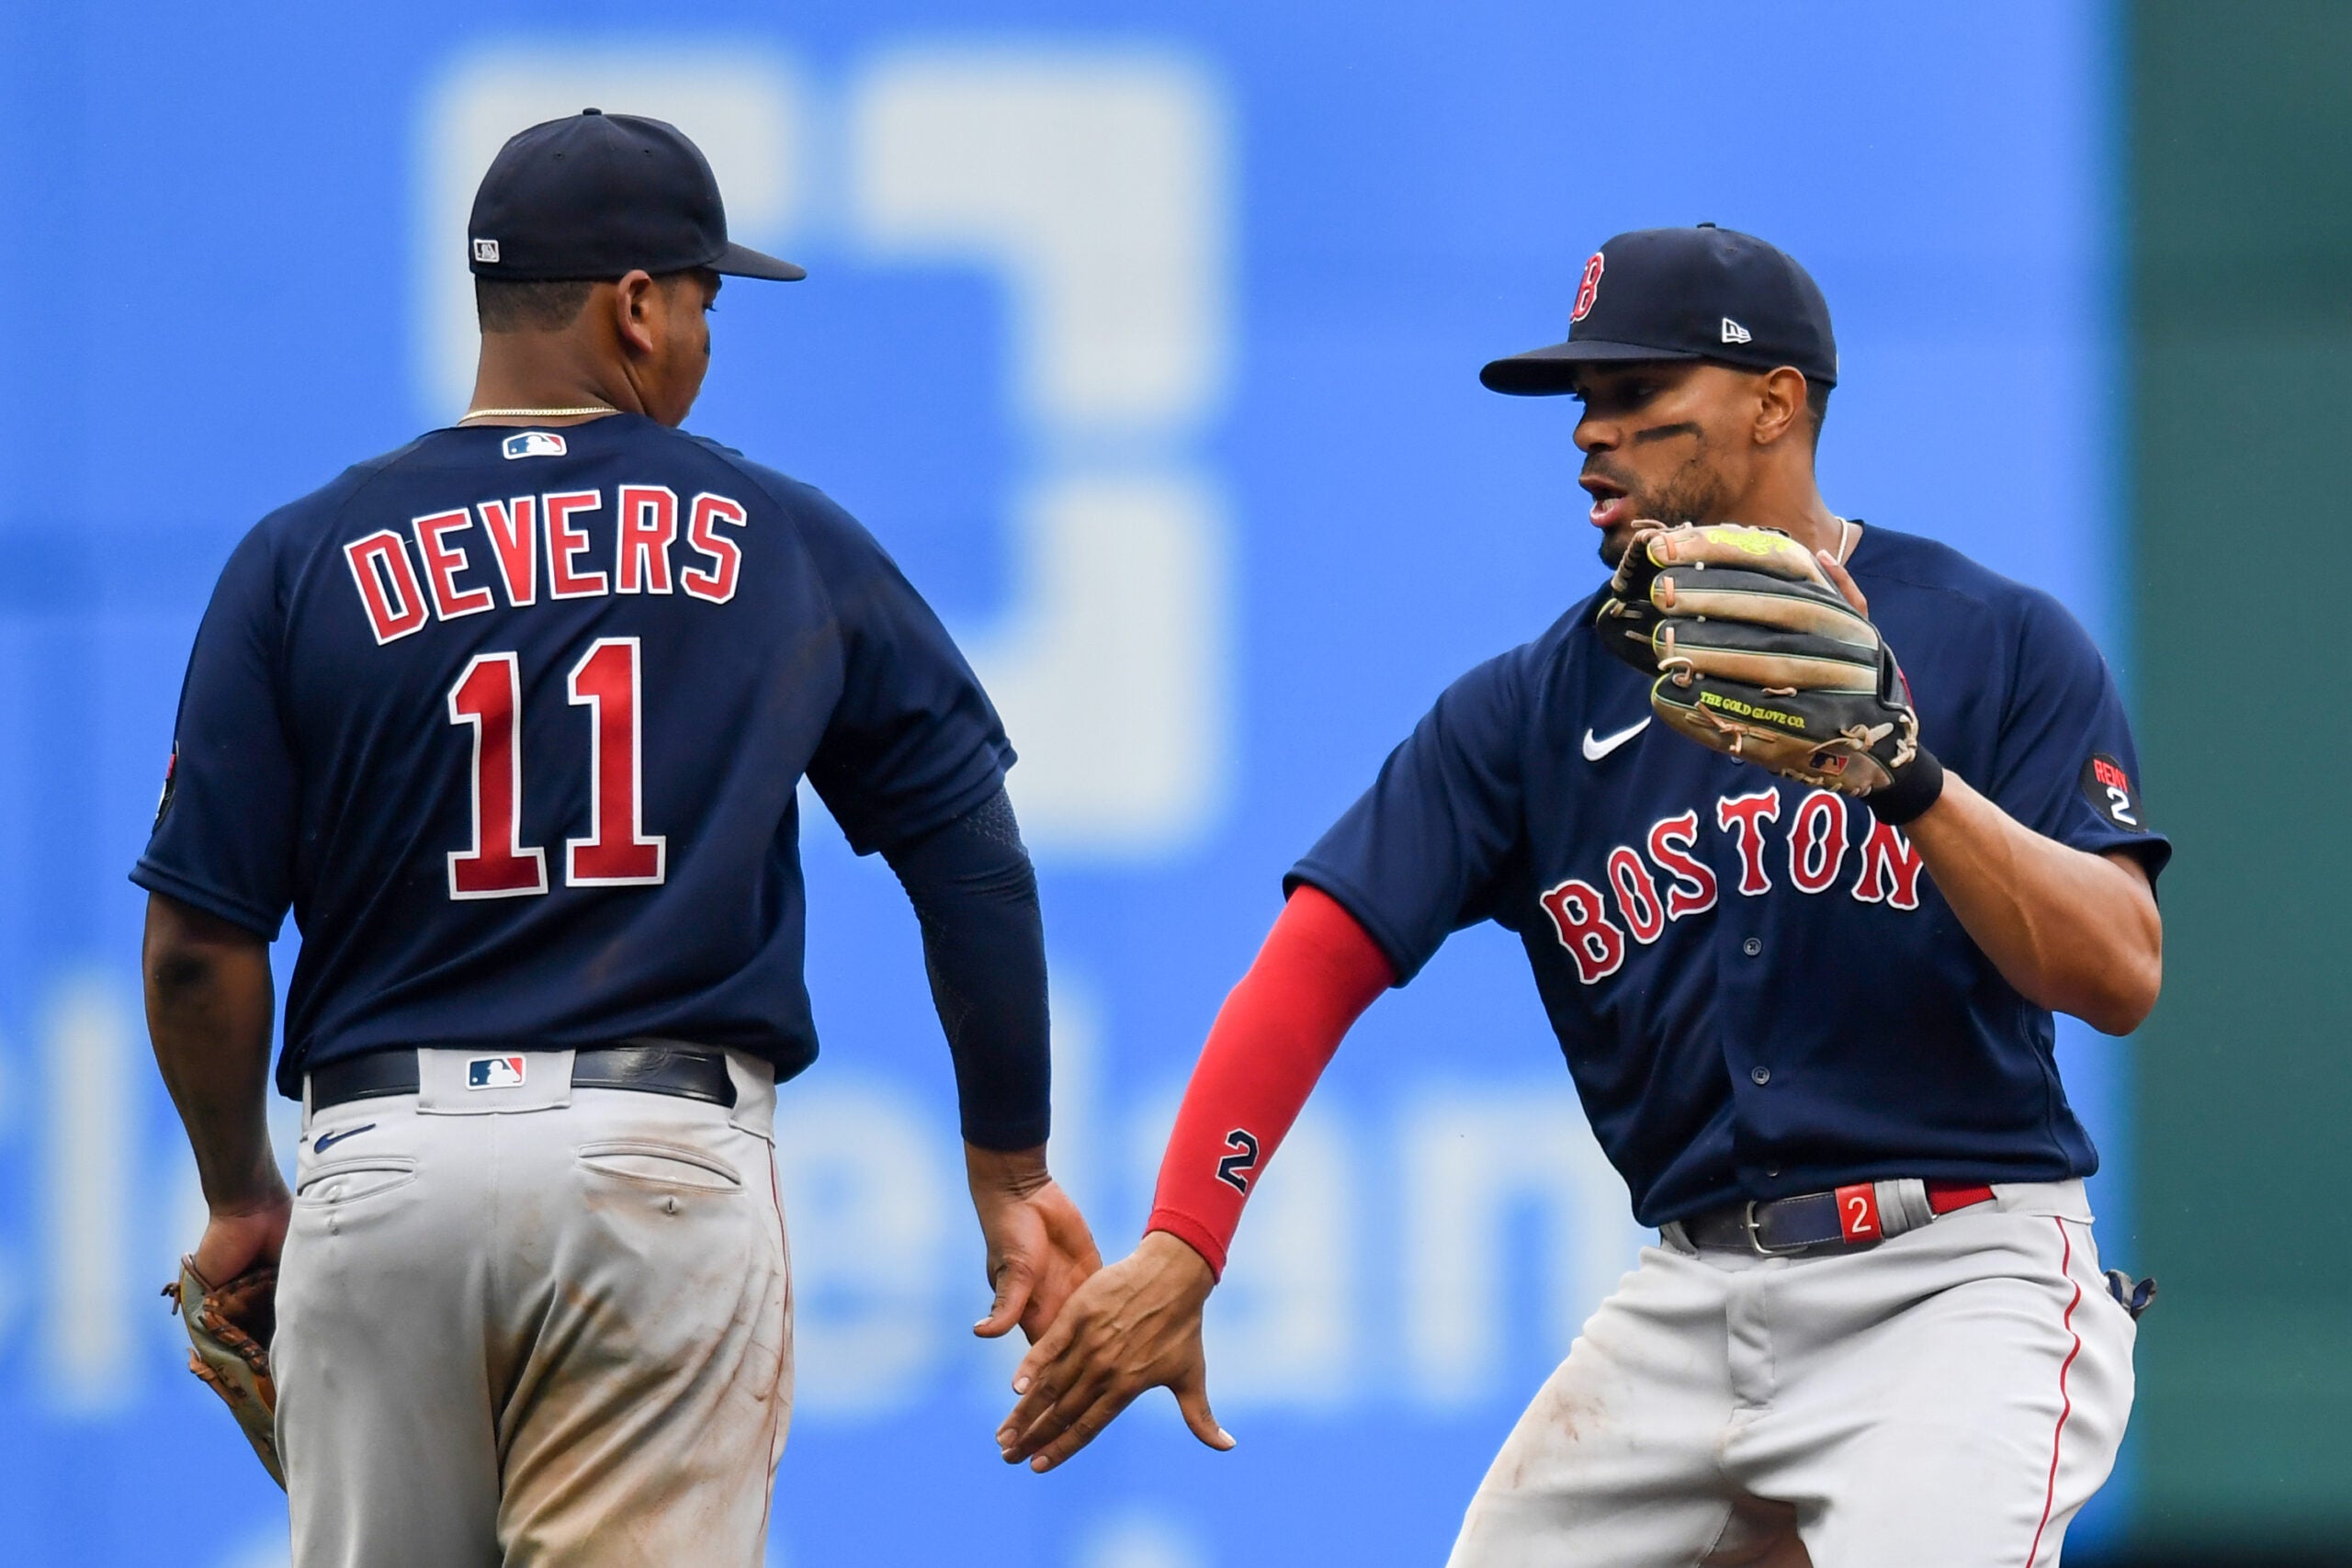 At 27, Bogaerts becomes leader for revamped Red Sox - The San